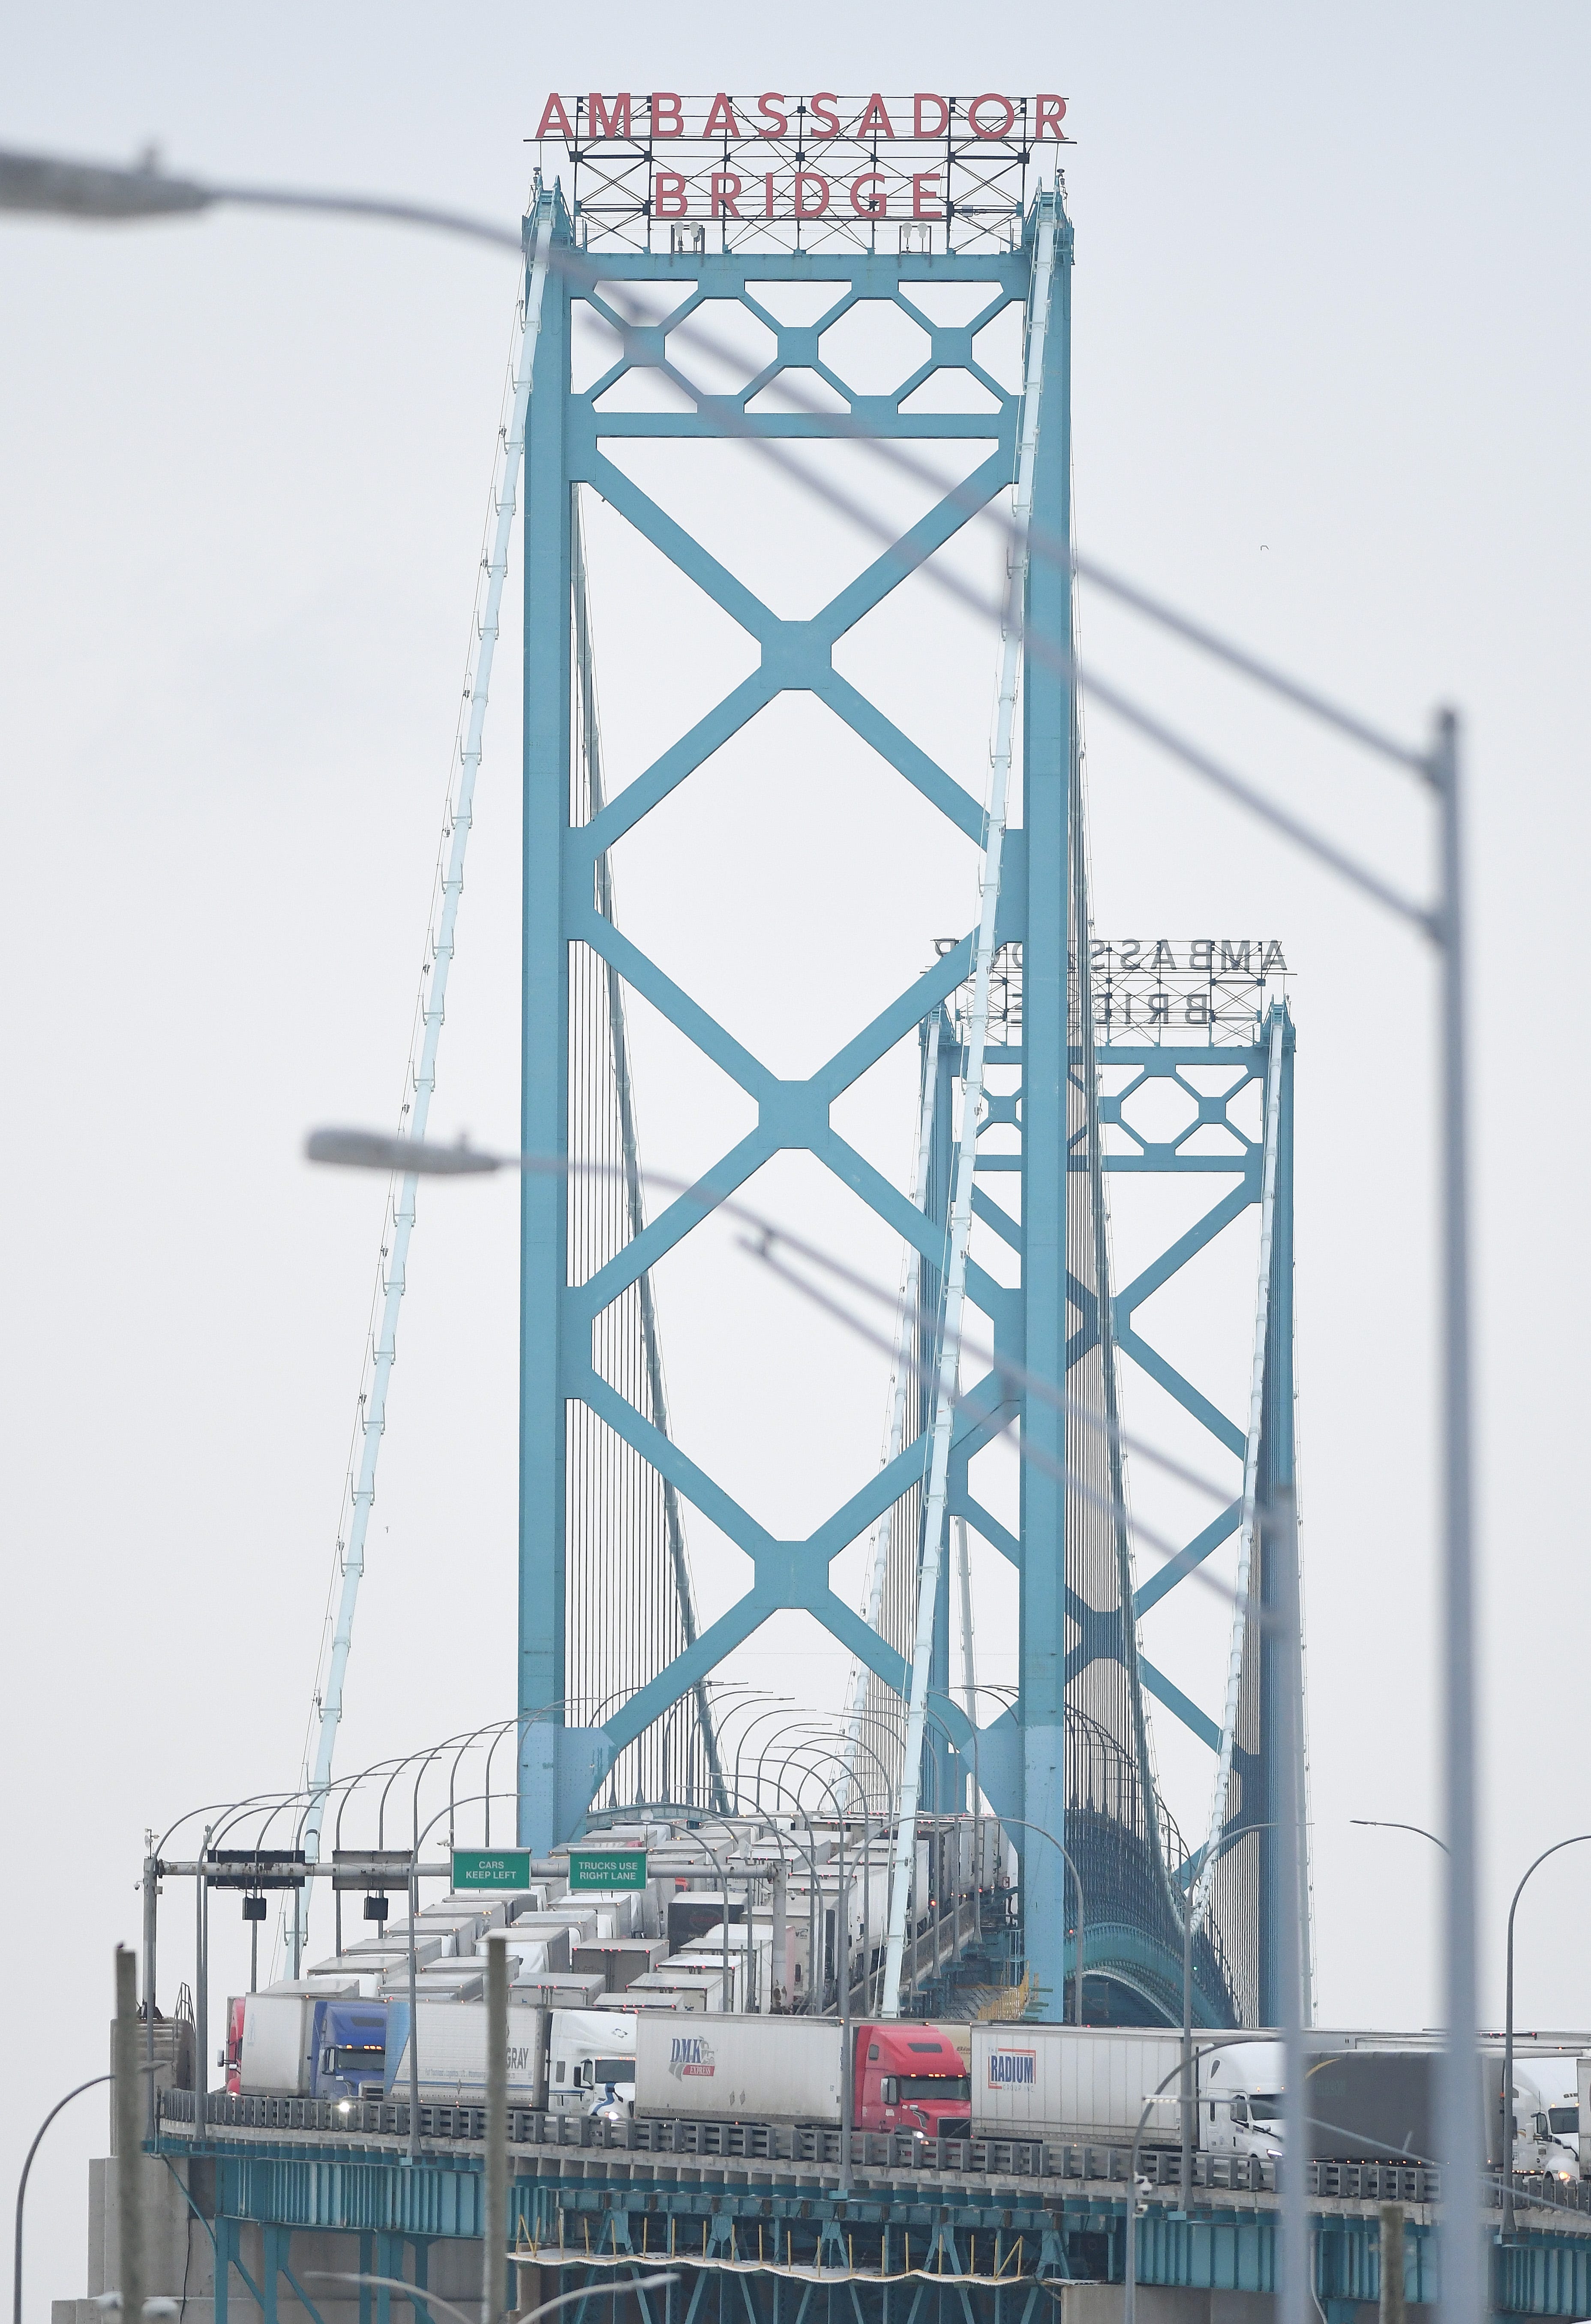 Trucks backed up heading to and from Canada on the Ambassador Bridge, due to protests on the Windsor side, in Detroit, Michigan on February 7, 2022.